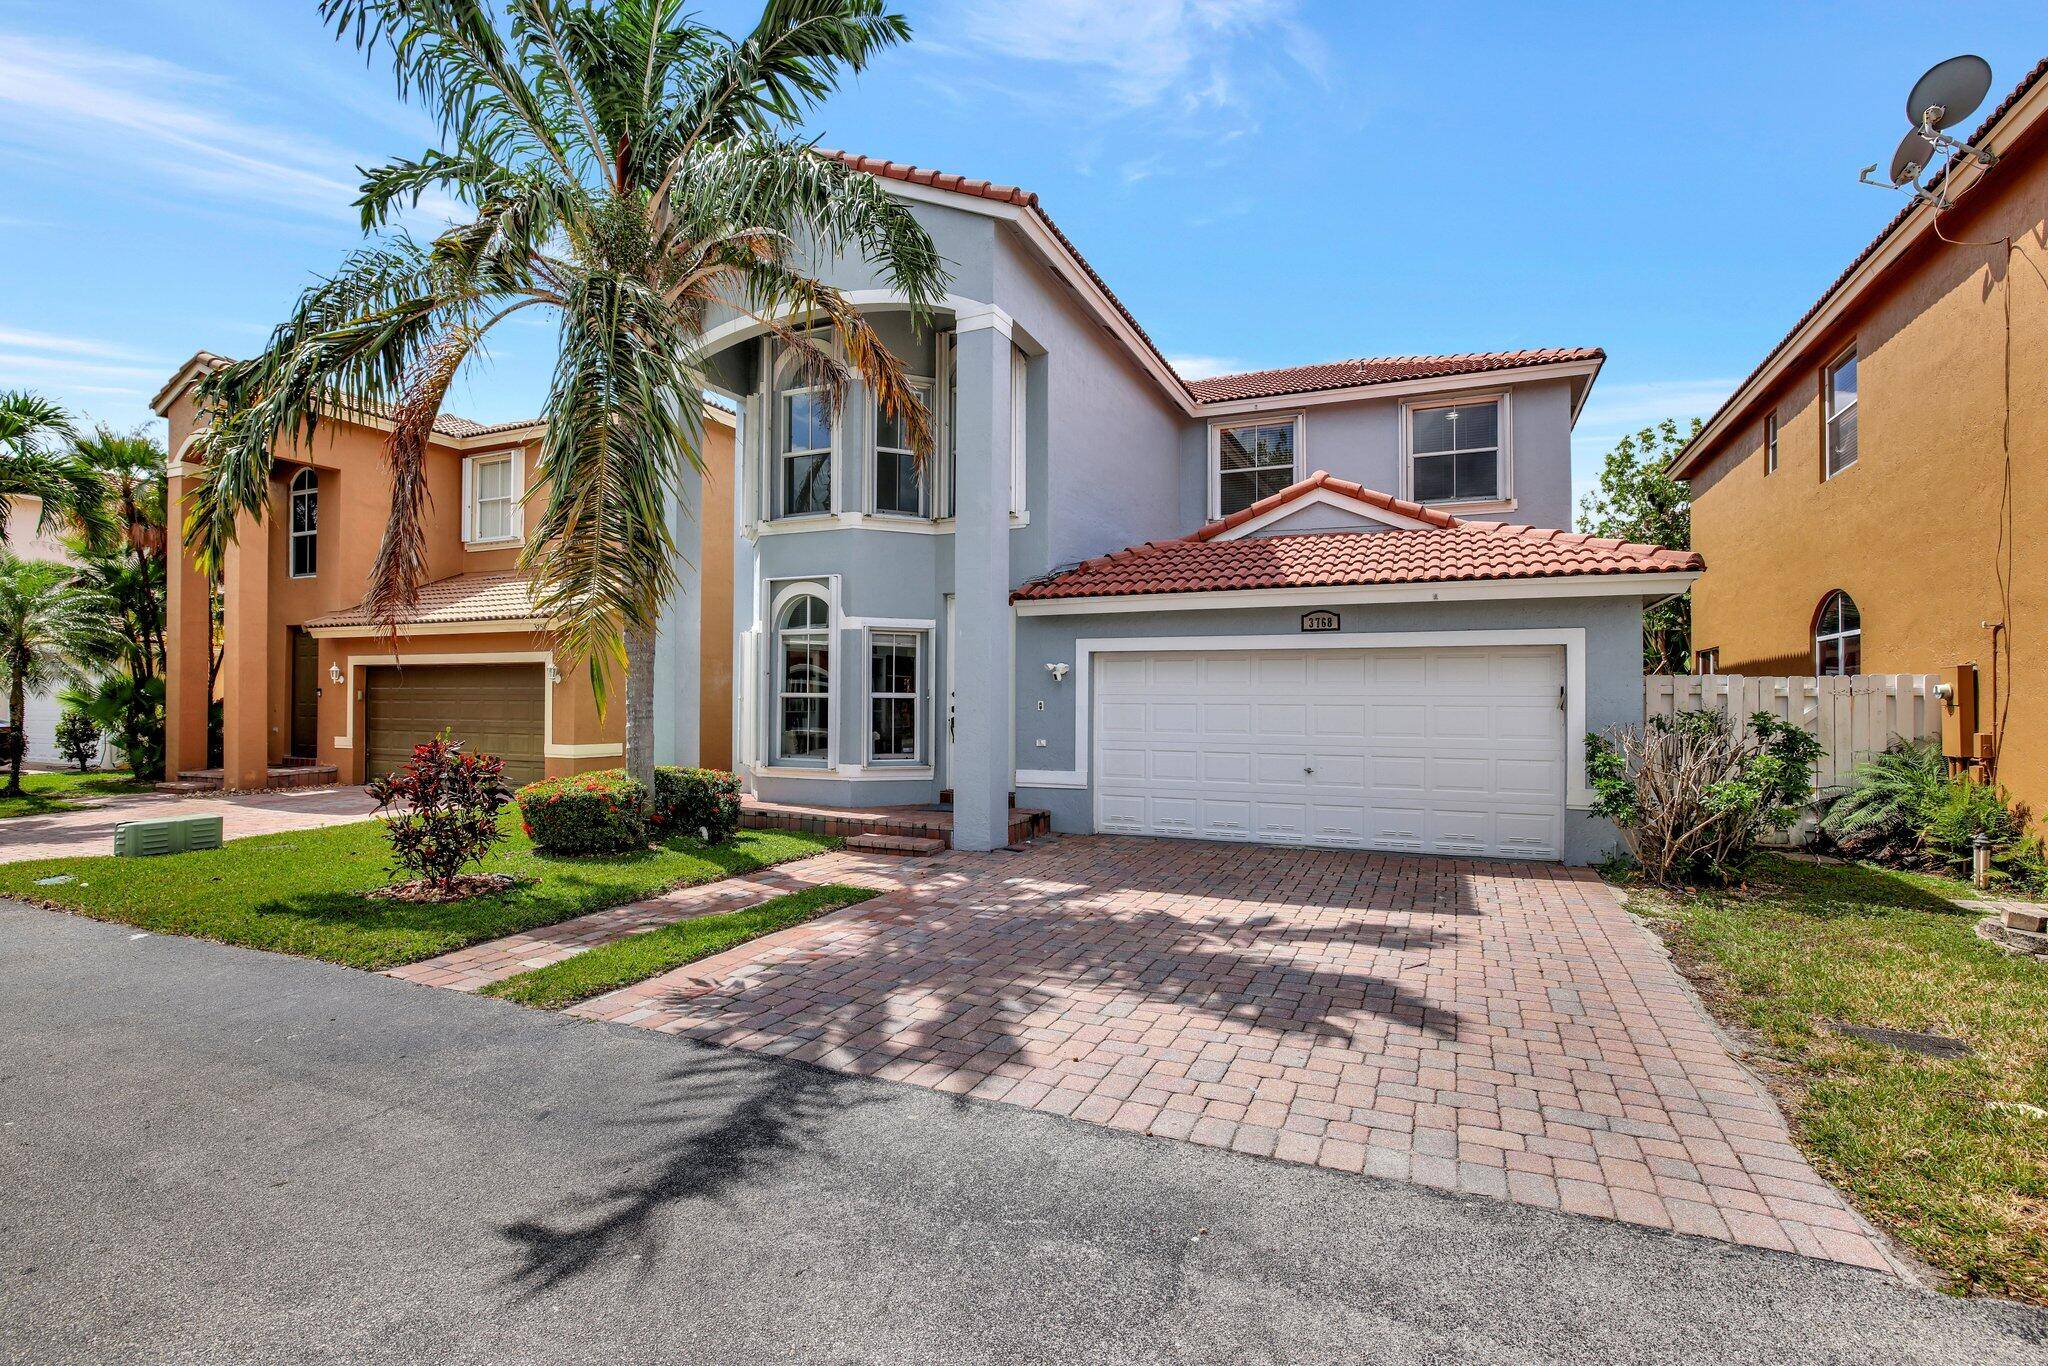 Welcome to this stunning two story house located in a beautiful gated community.